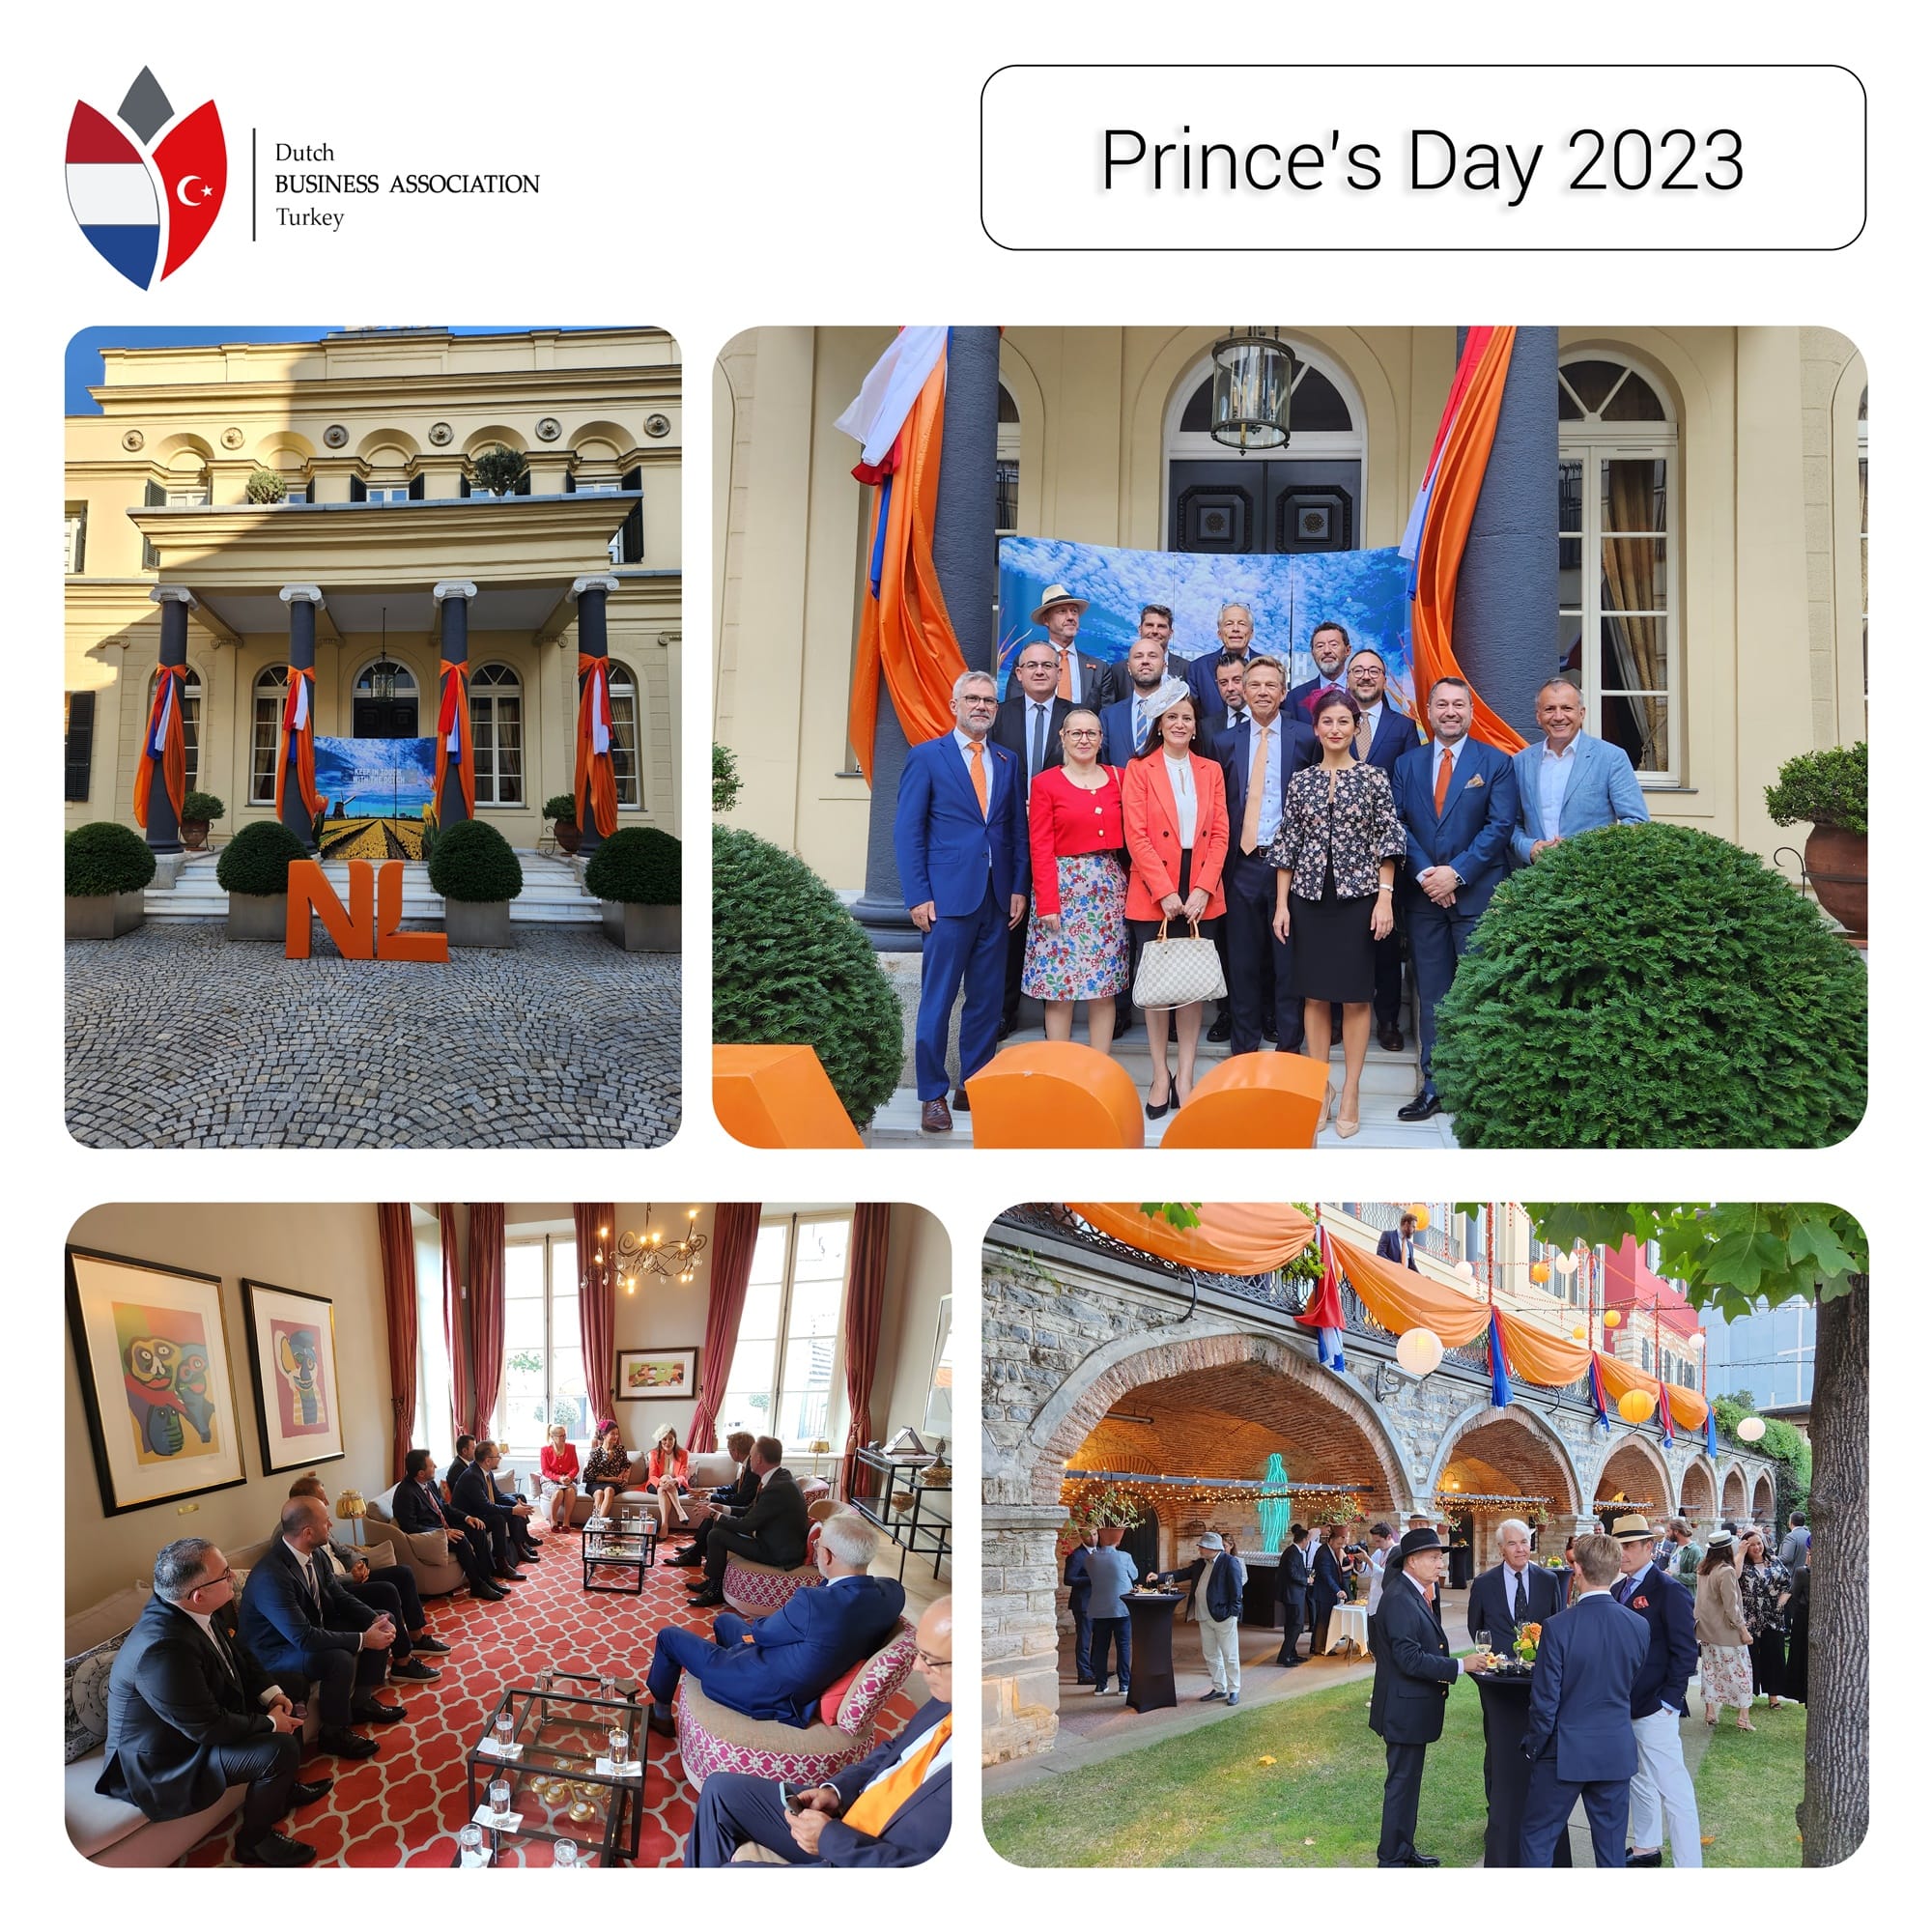 Prince's Day 2023